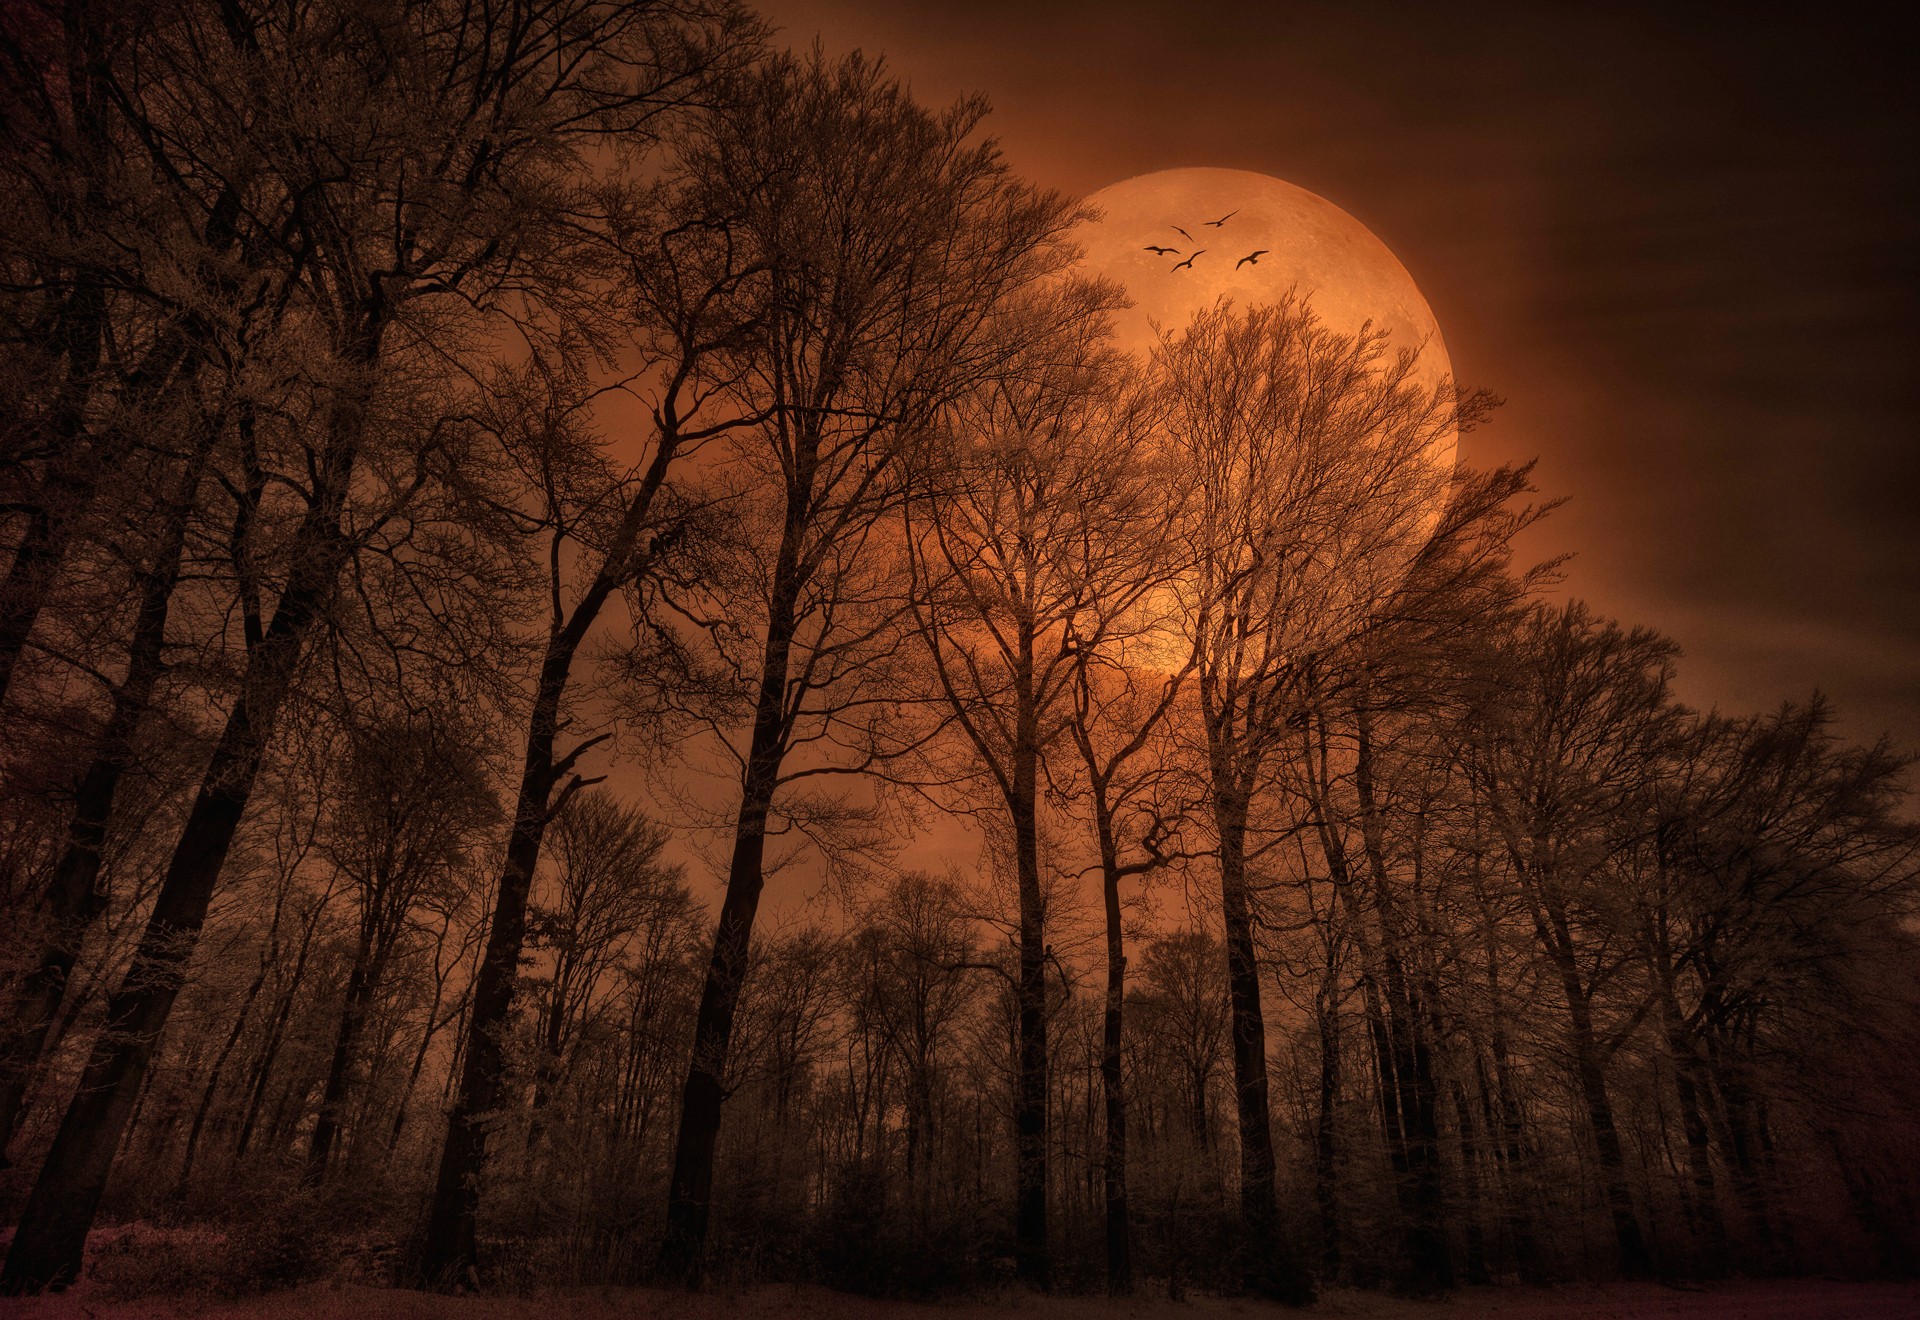 General 1920x1320 forest trees Moon monochrome spooky